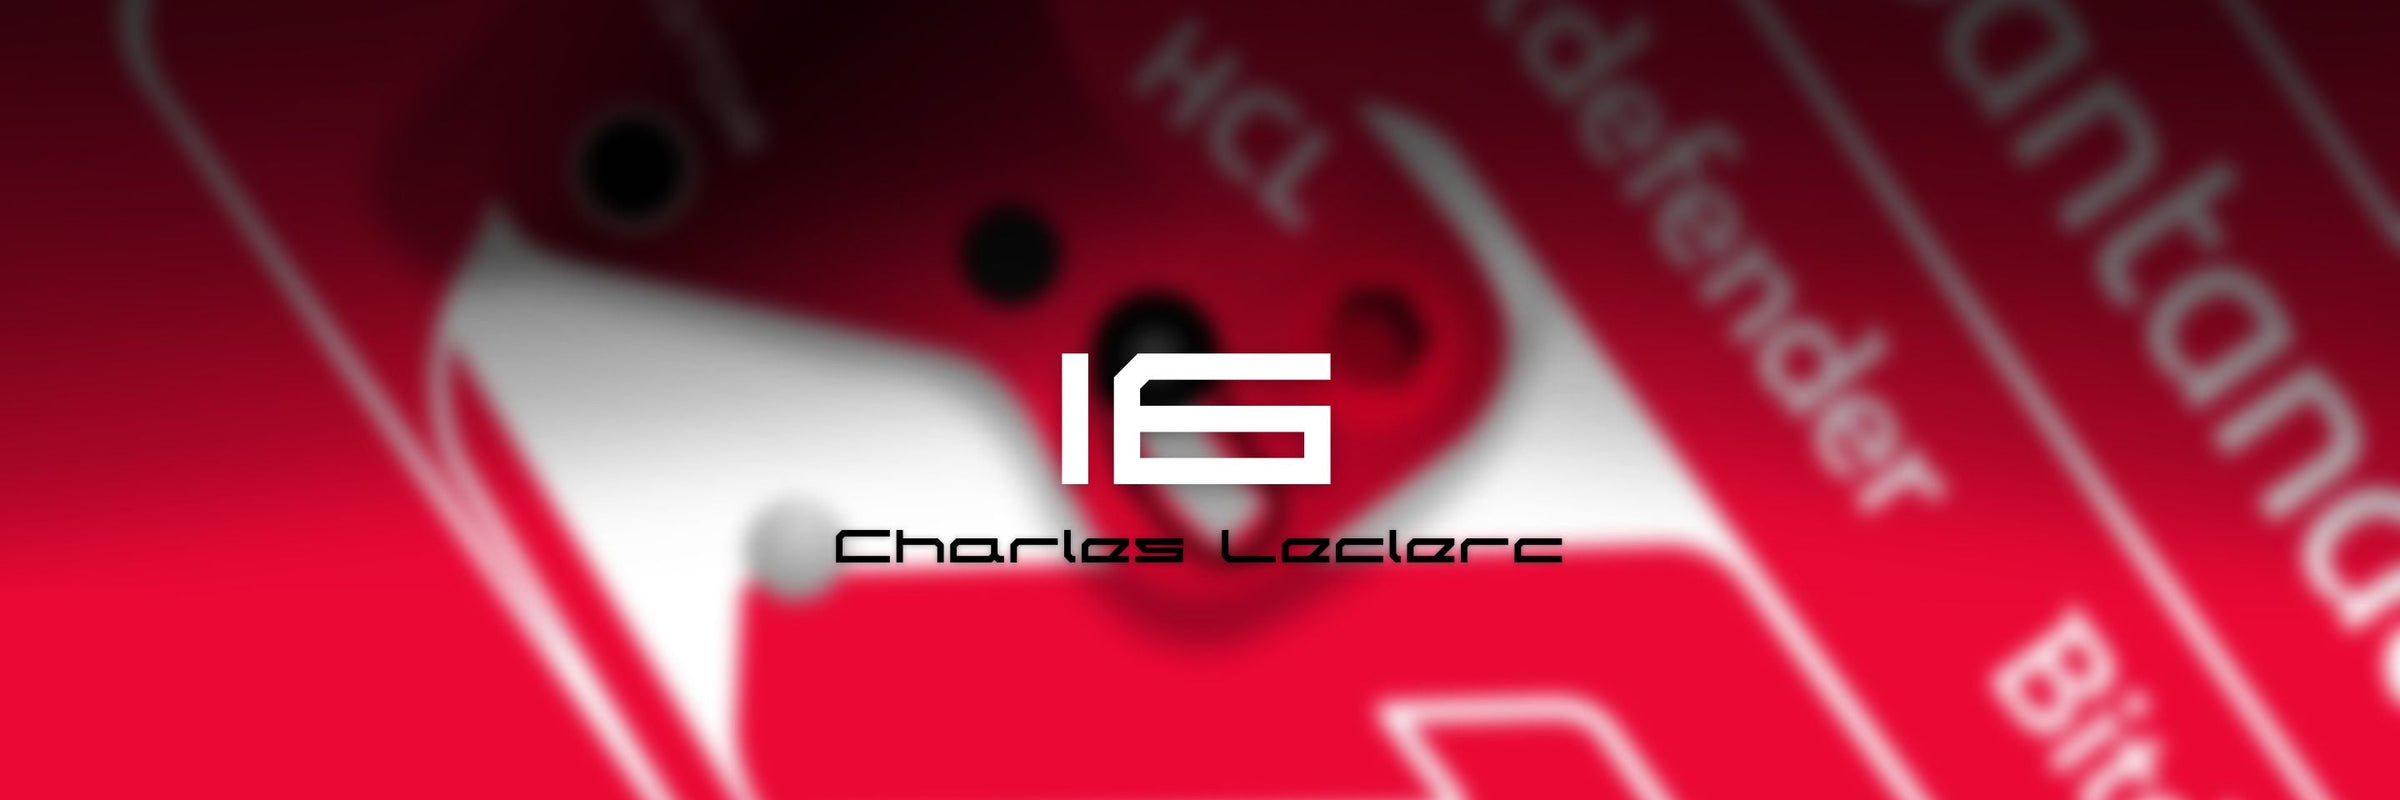 Charles Leclerc - F1 and Motorpsort Offficial Merchandise - Fueler store